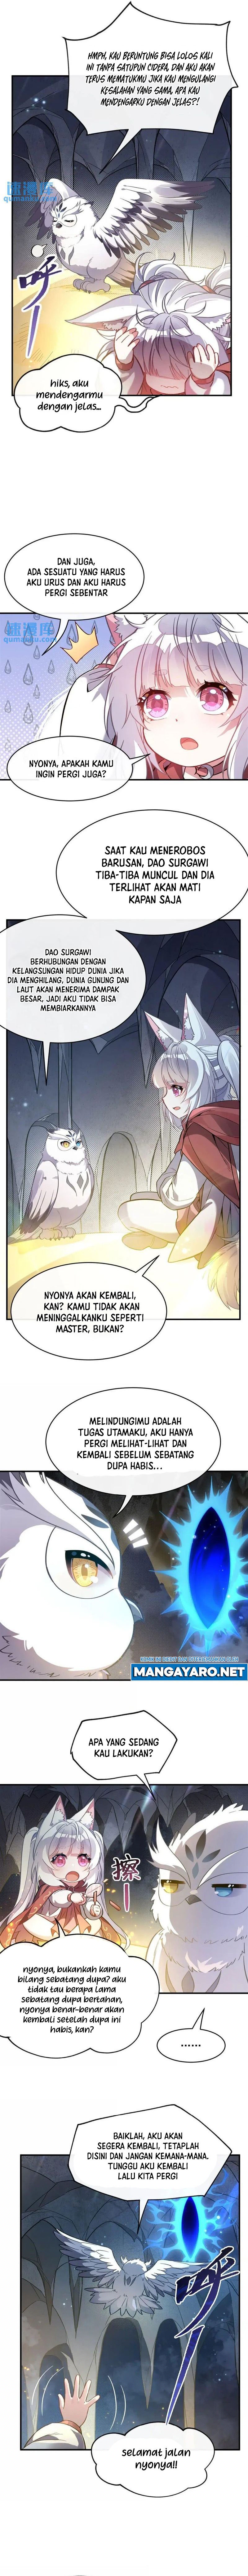 Dilarang COPAS - situs resmi www.mangacanblog.com - Komik my female apprentices are all big shots from the future 198 - chapter 198 199 Indonesia my female apprentices are all big shots from the future 198 - chapter 198 Terbaru 5|Baca Manga Komik Indonesia|Mangacan